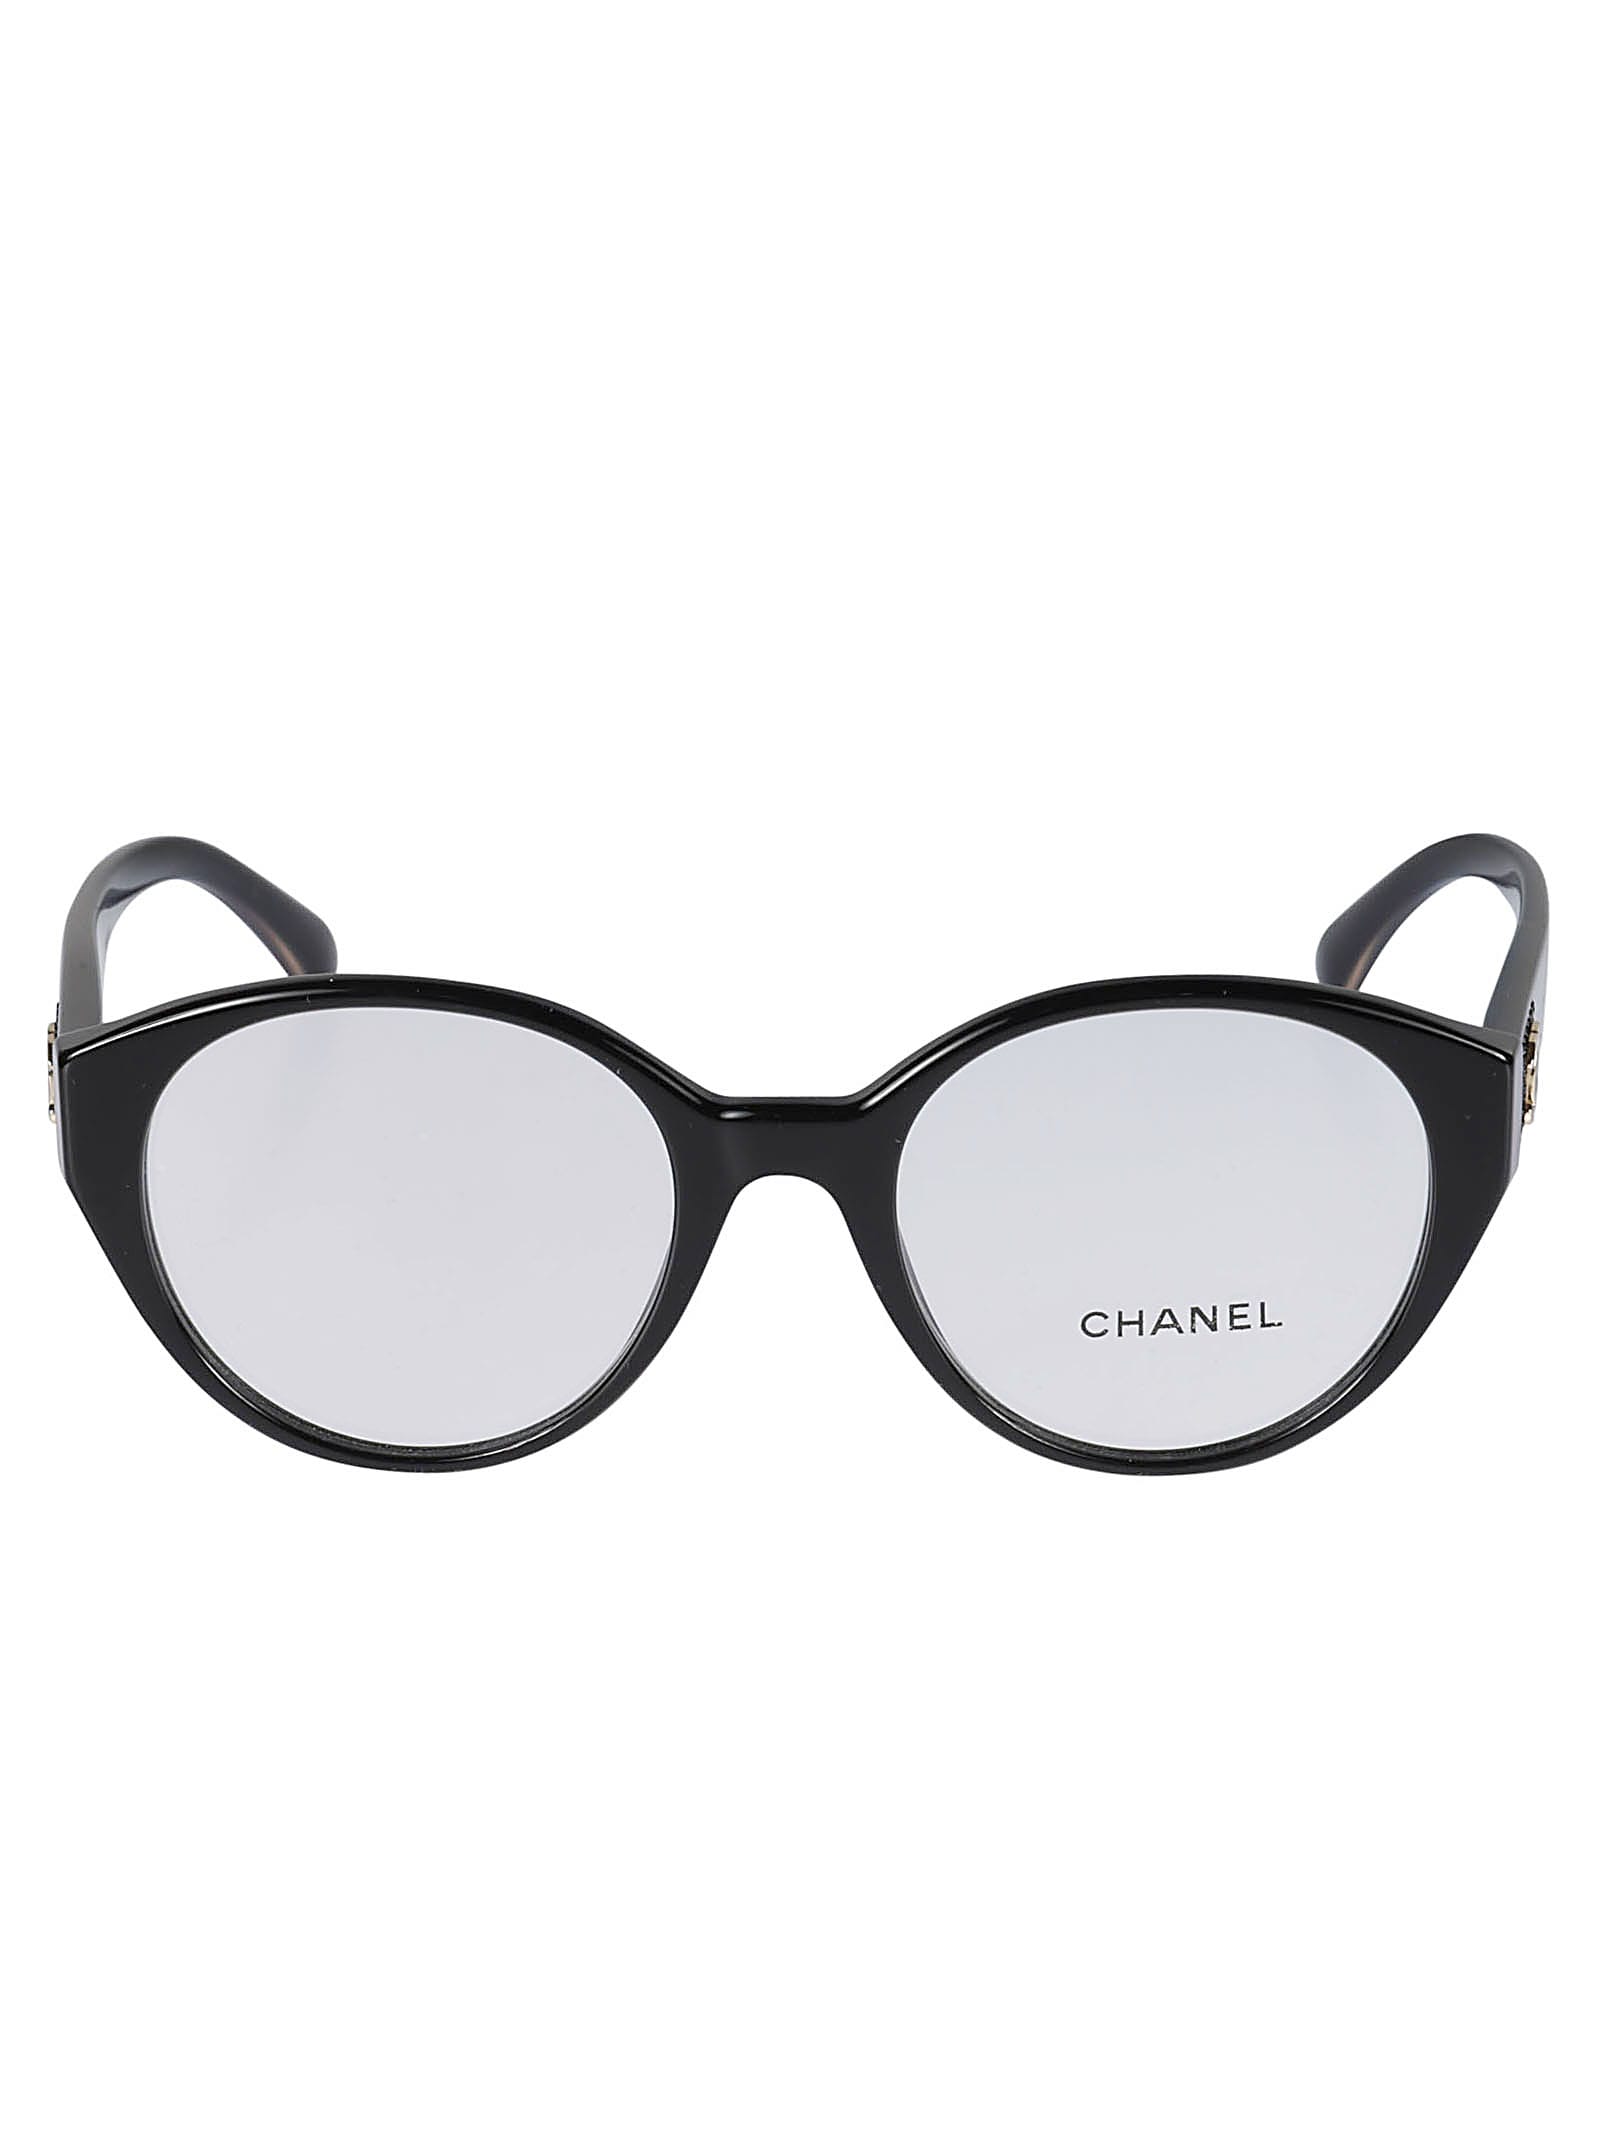 CHANEL Black Round-frame Optical Glasses ($345) ❤ liked on Polyvore  featuring accessories, eyewear, eyeglasses, c…